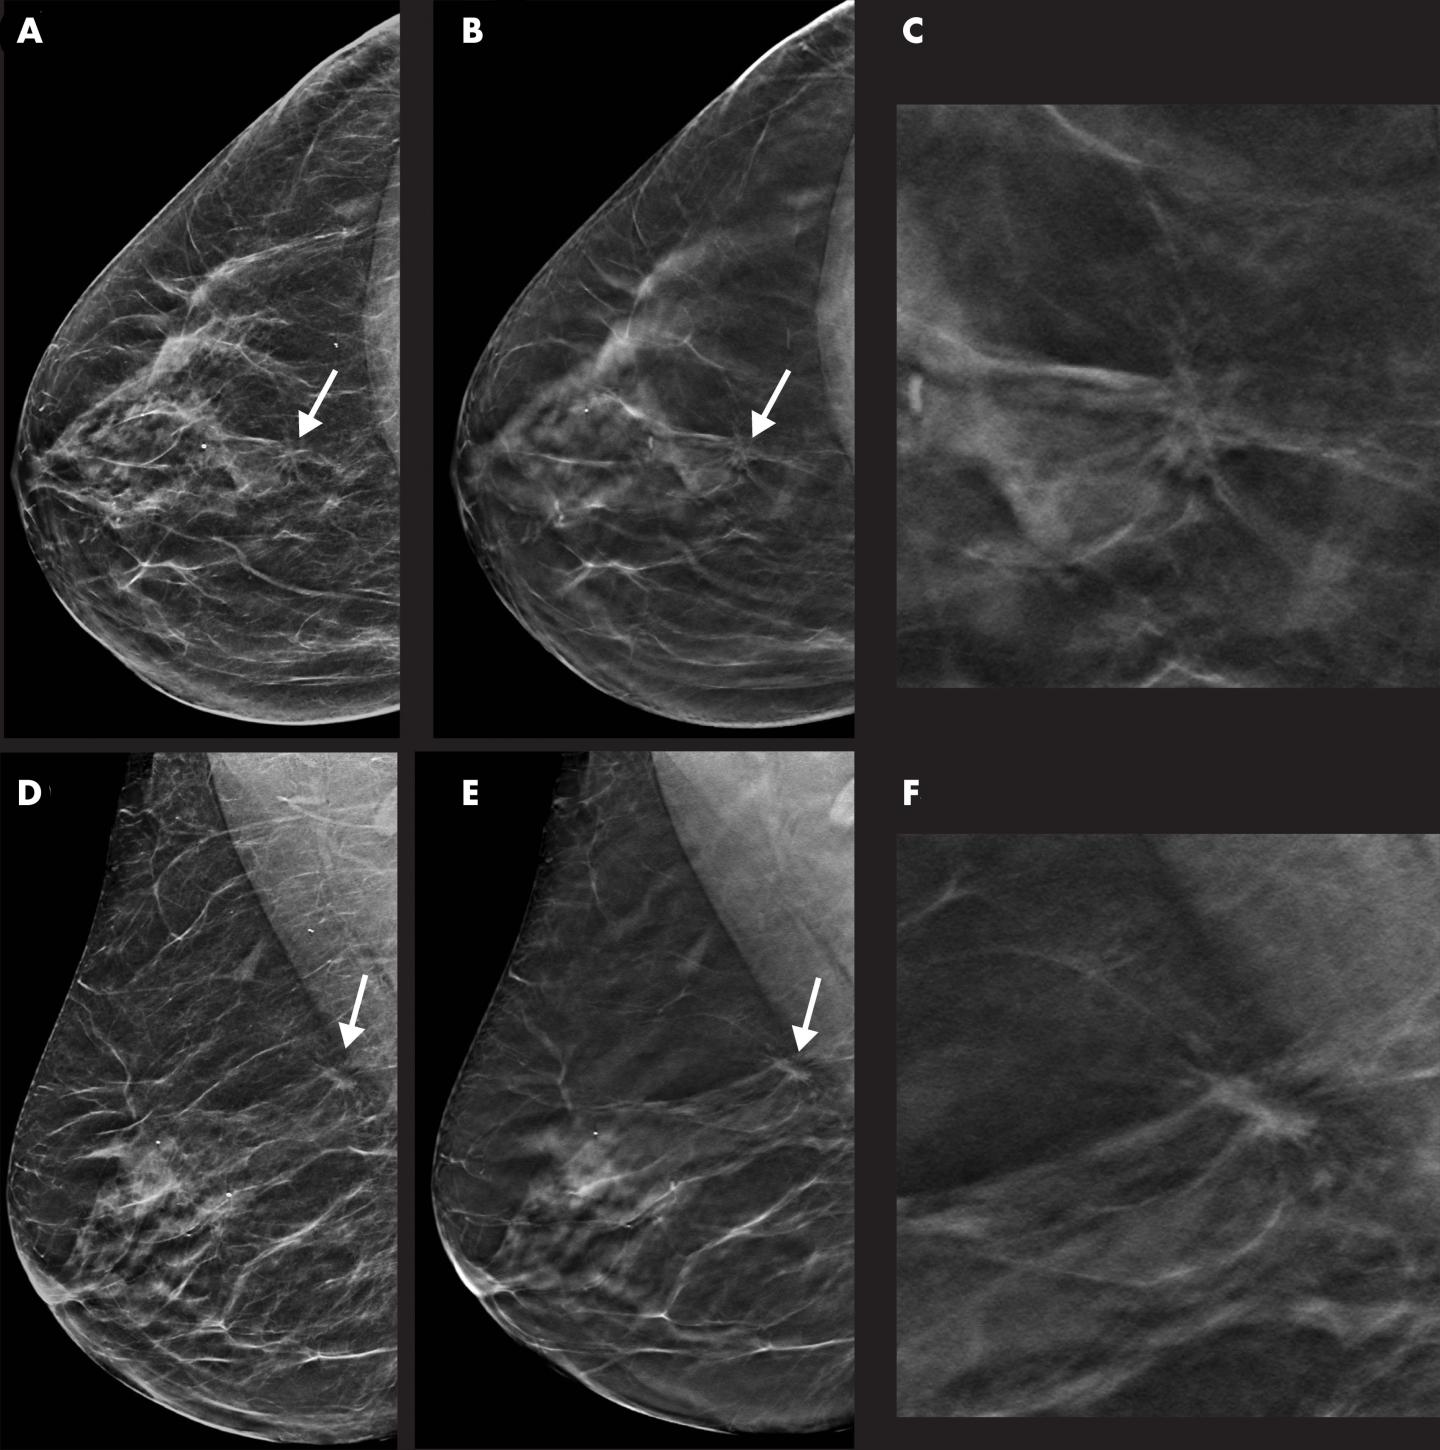 Tomosynthesis with Synthetic Mammography Improves Breast Cancer Detection